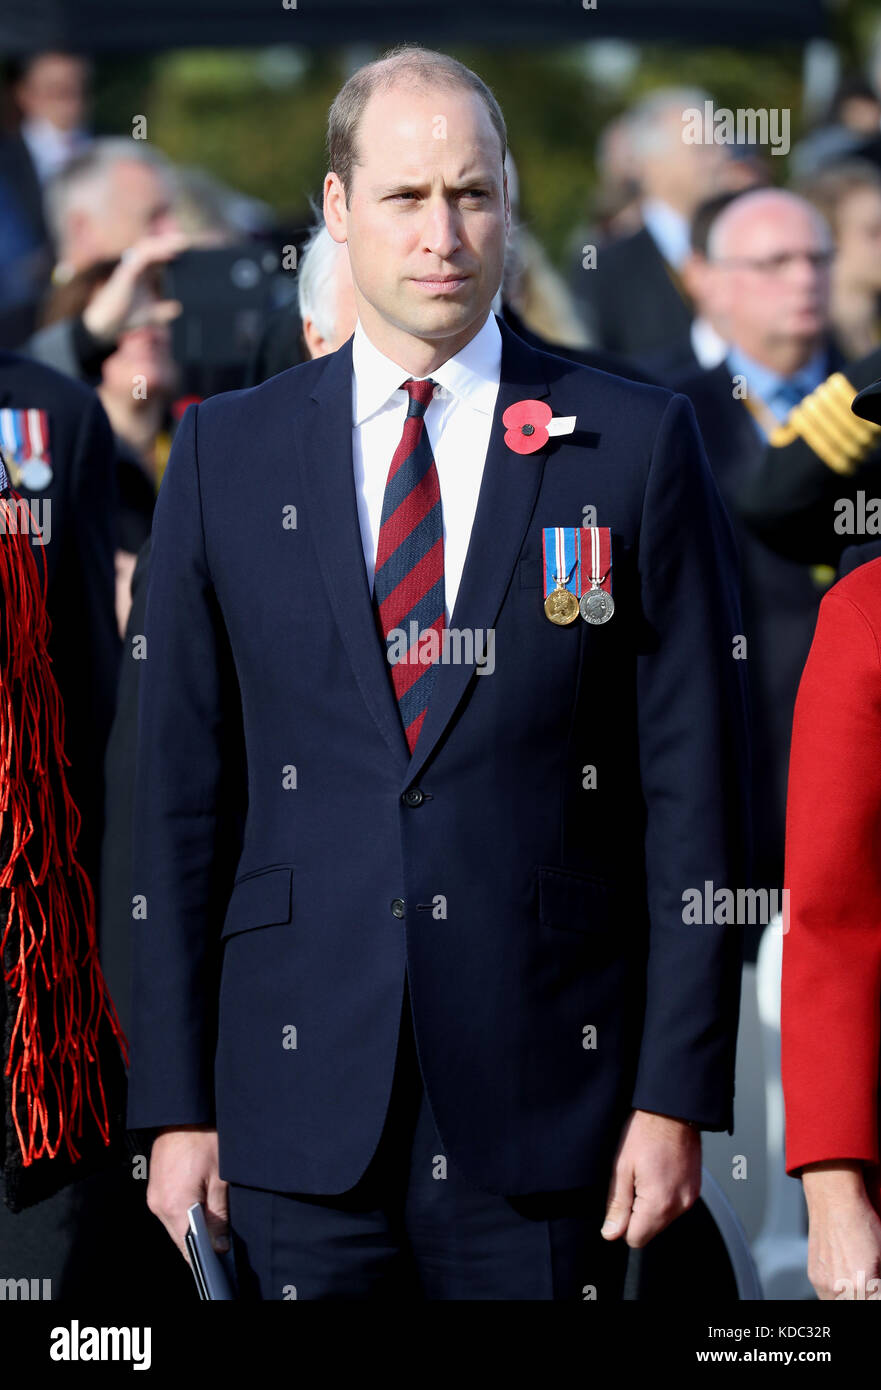 The Duke of Cambridge during the New Zealand national commemoration for the Battle of Passchendaele at Tyne Cot Cemetery, Belgium. Stock Photo